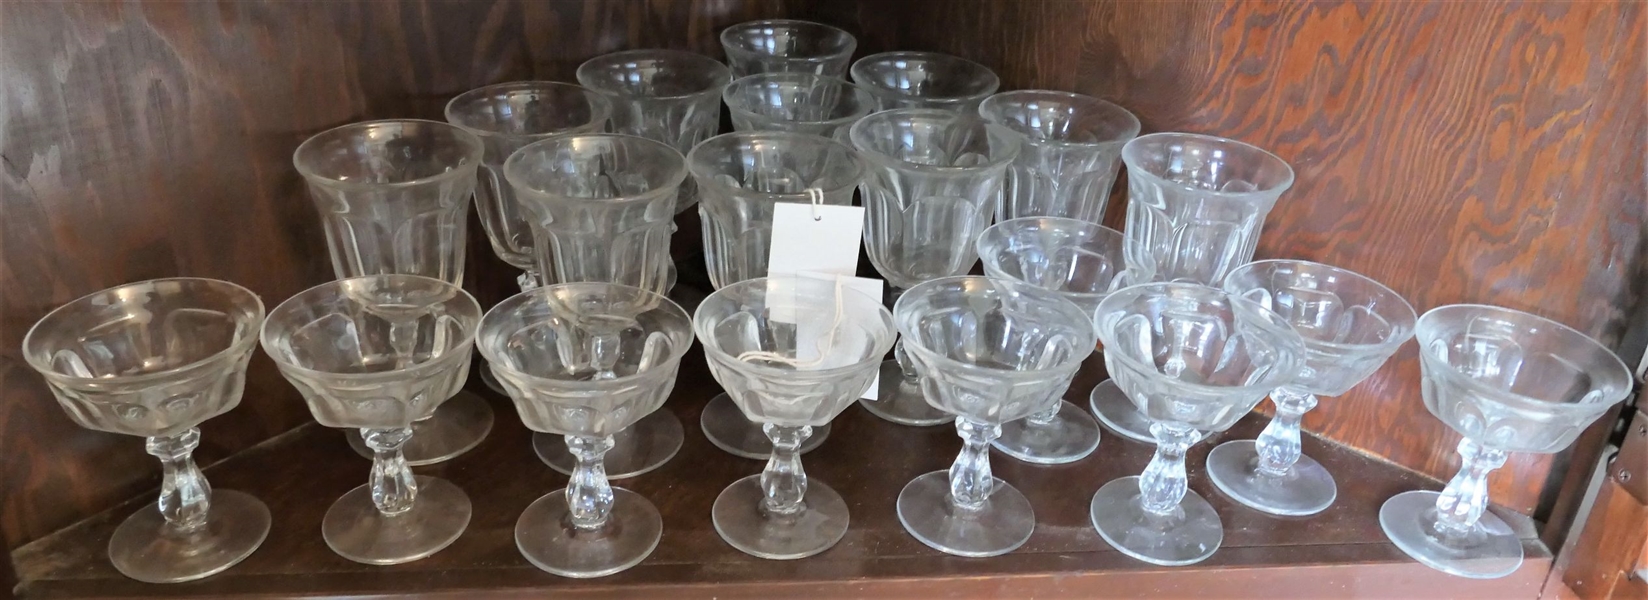 20 Pieces of Heisey Glassware including 6 3/4" Goblets and 4 1/2" Coupes